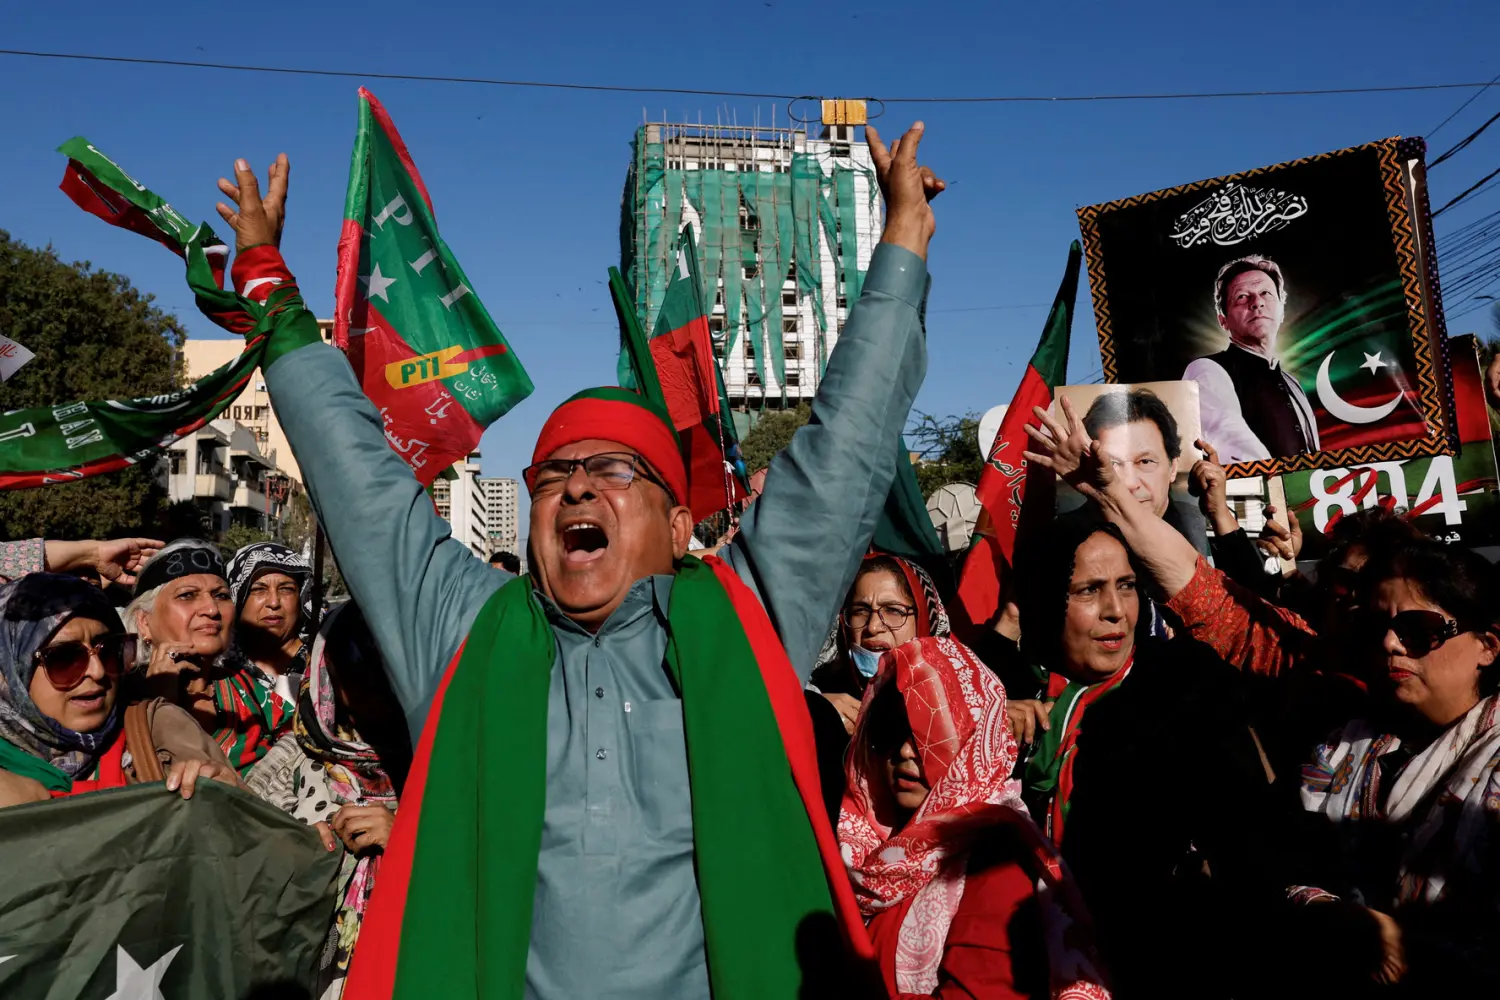 Supporters of former Prime Minister Imran Khan's party, the Pakistan Tehreek-e-Insaf (PTI), chant slogans as they gather during a protest demanding free and fair election results, outside the provincial election commission office in Karachi, Pakistan, February 17, 2024. REUTERS/Akhtar Soomro/File Photo